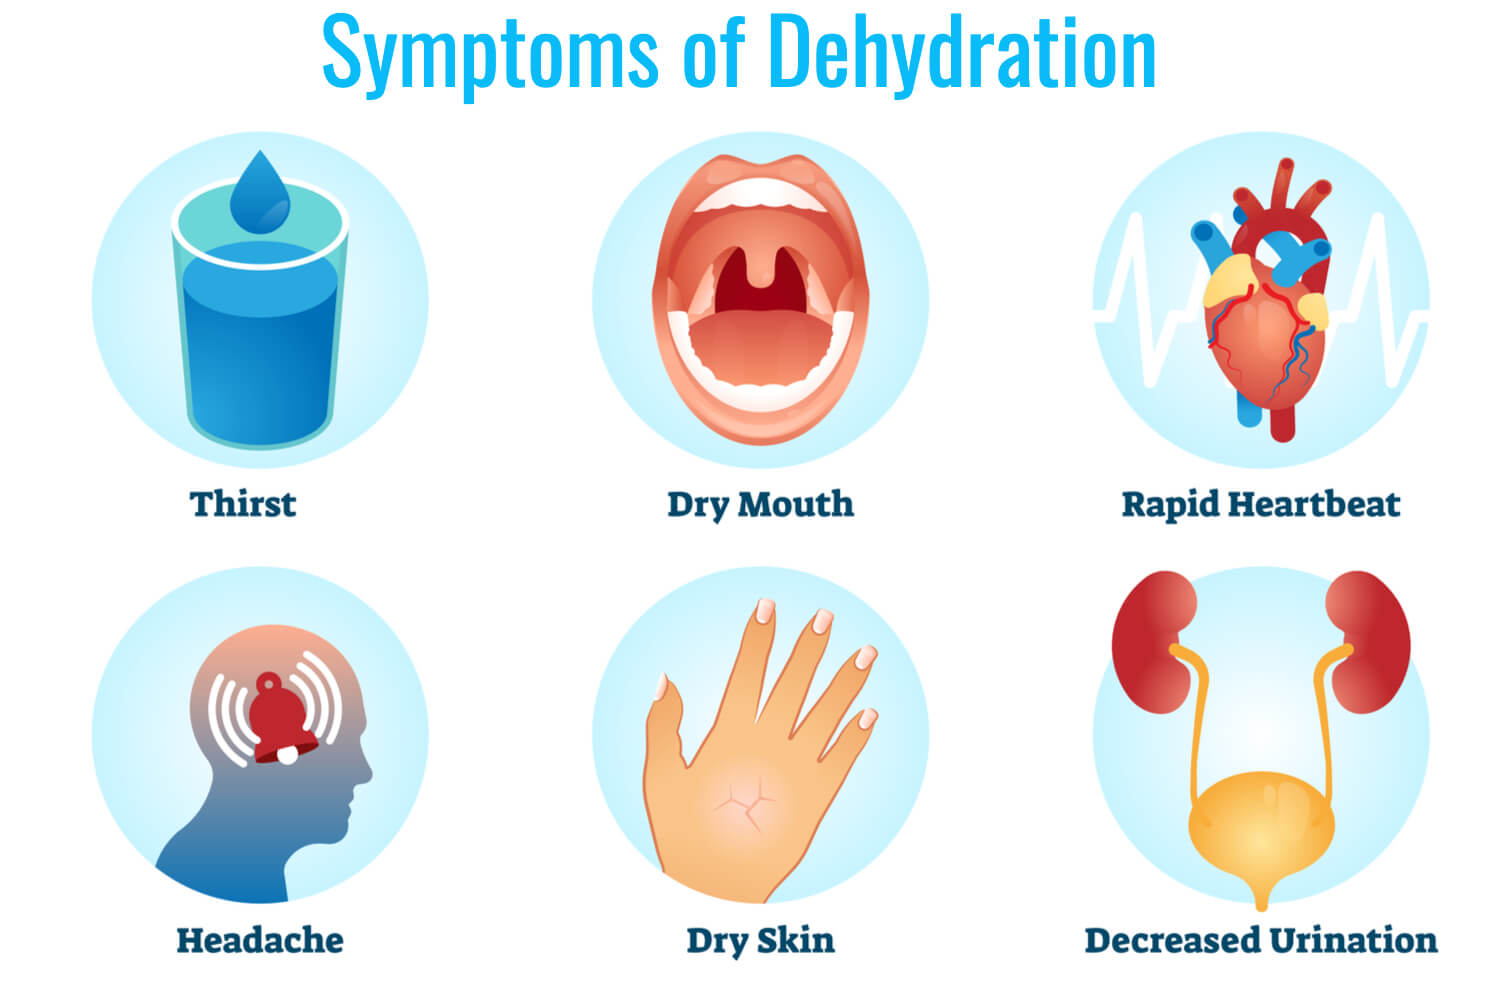 Symptoms of Dehydration During Pregnancy